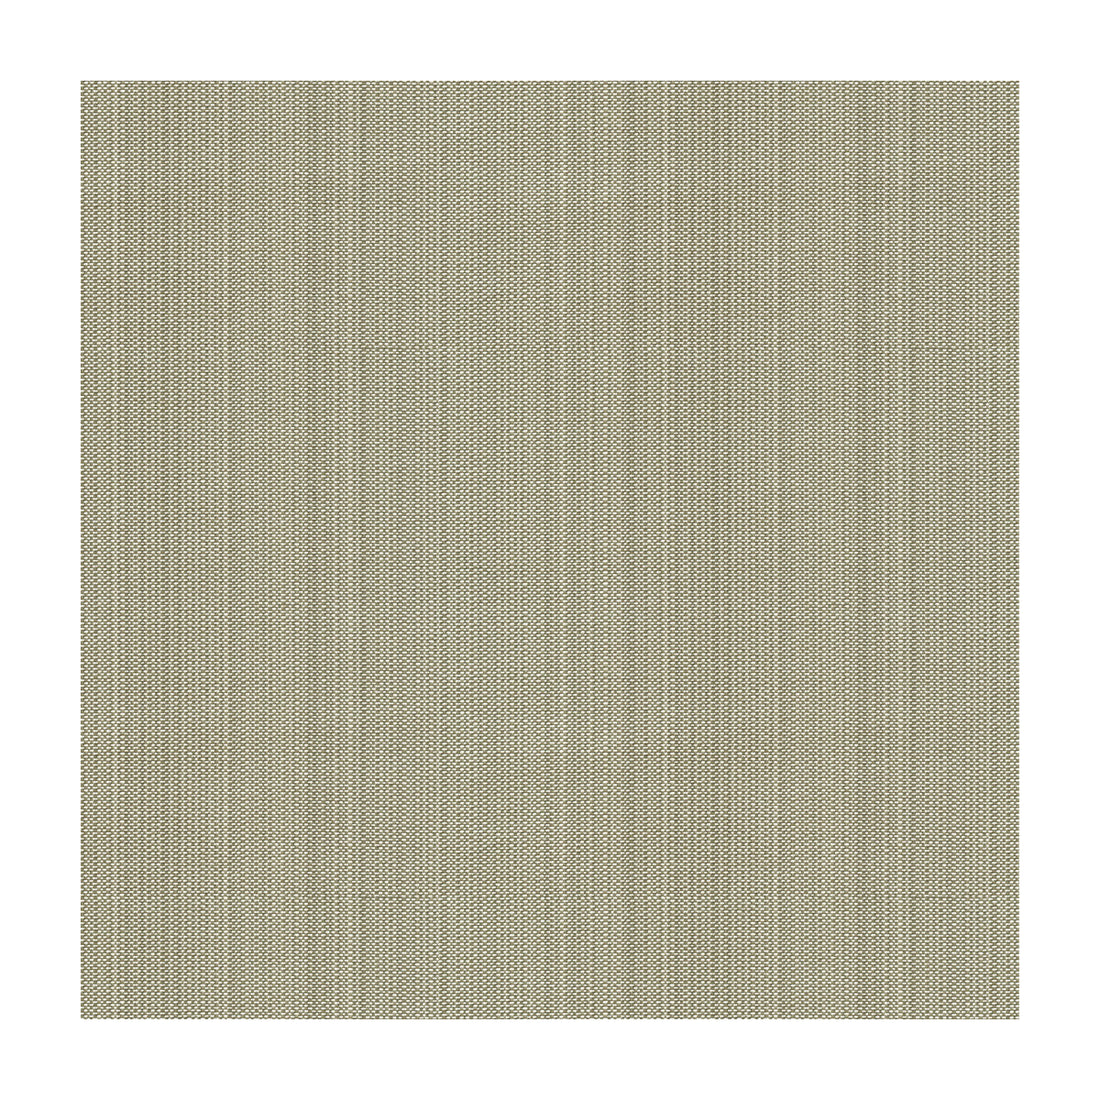 Starboard fabric in gray stone color - pattern 33526.11.0 - by Kravet Design in the Waterworks II collection